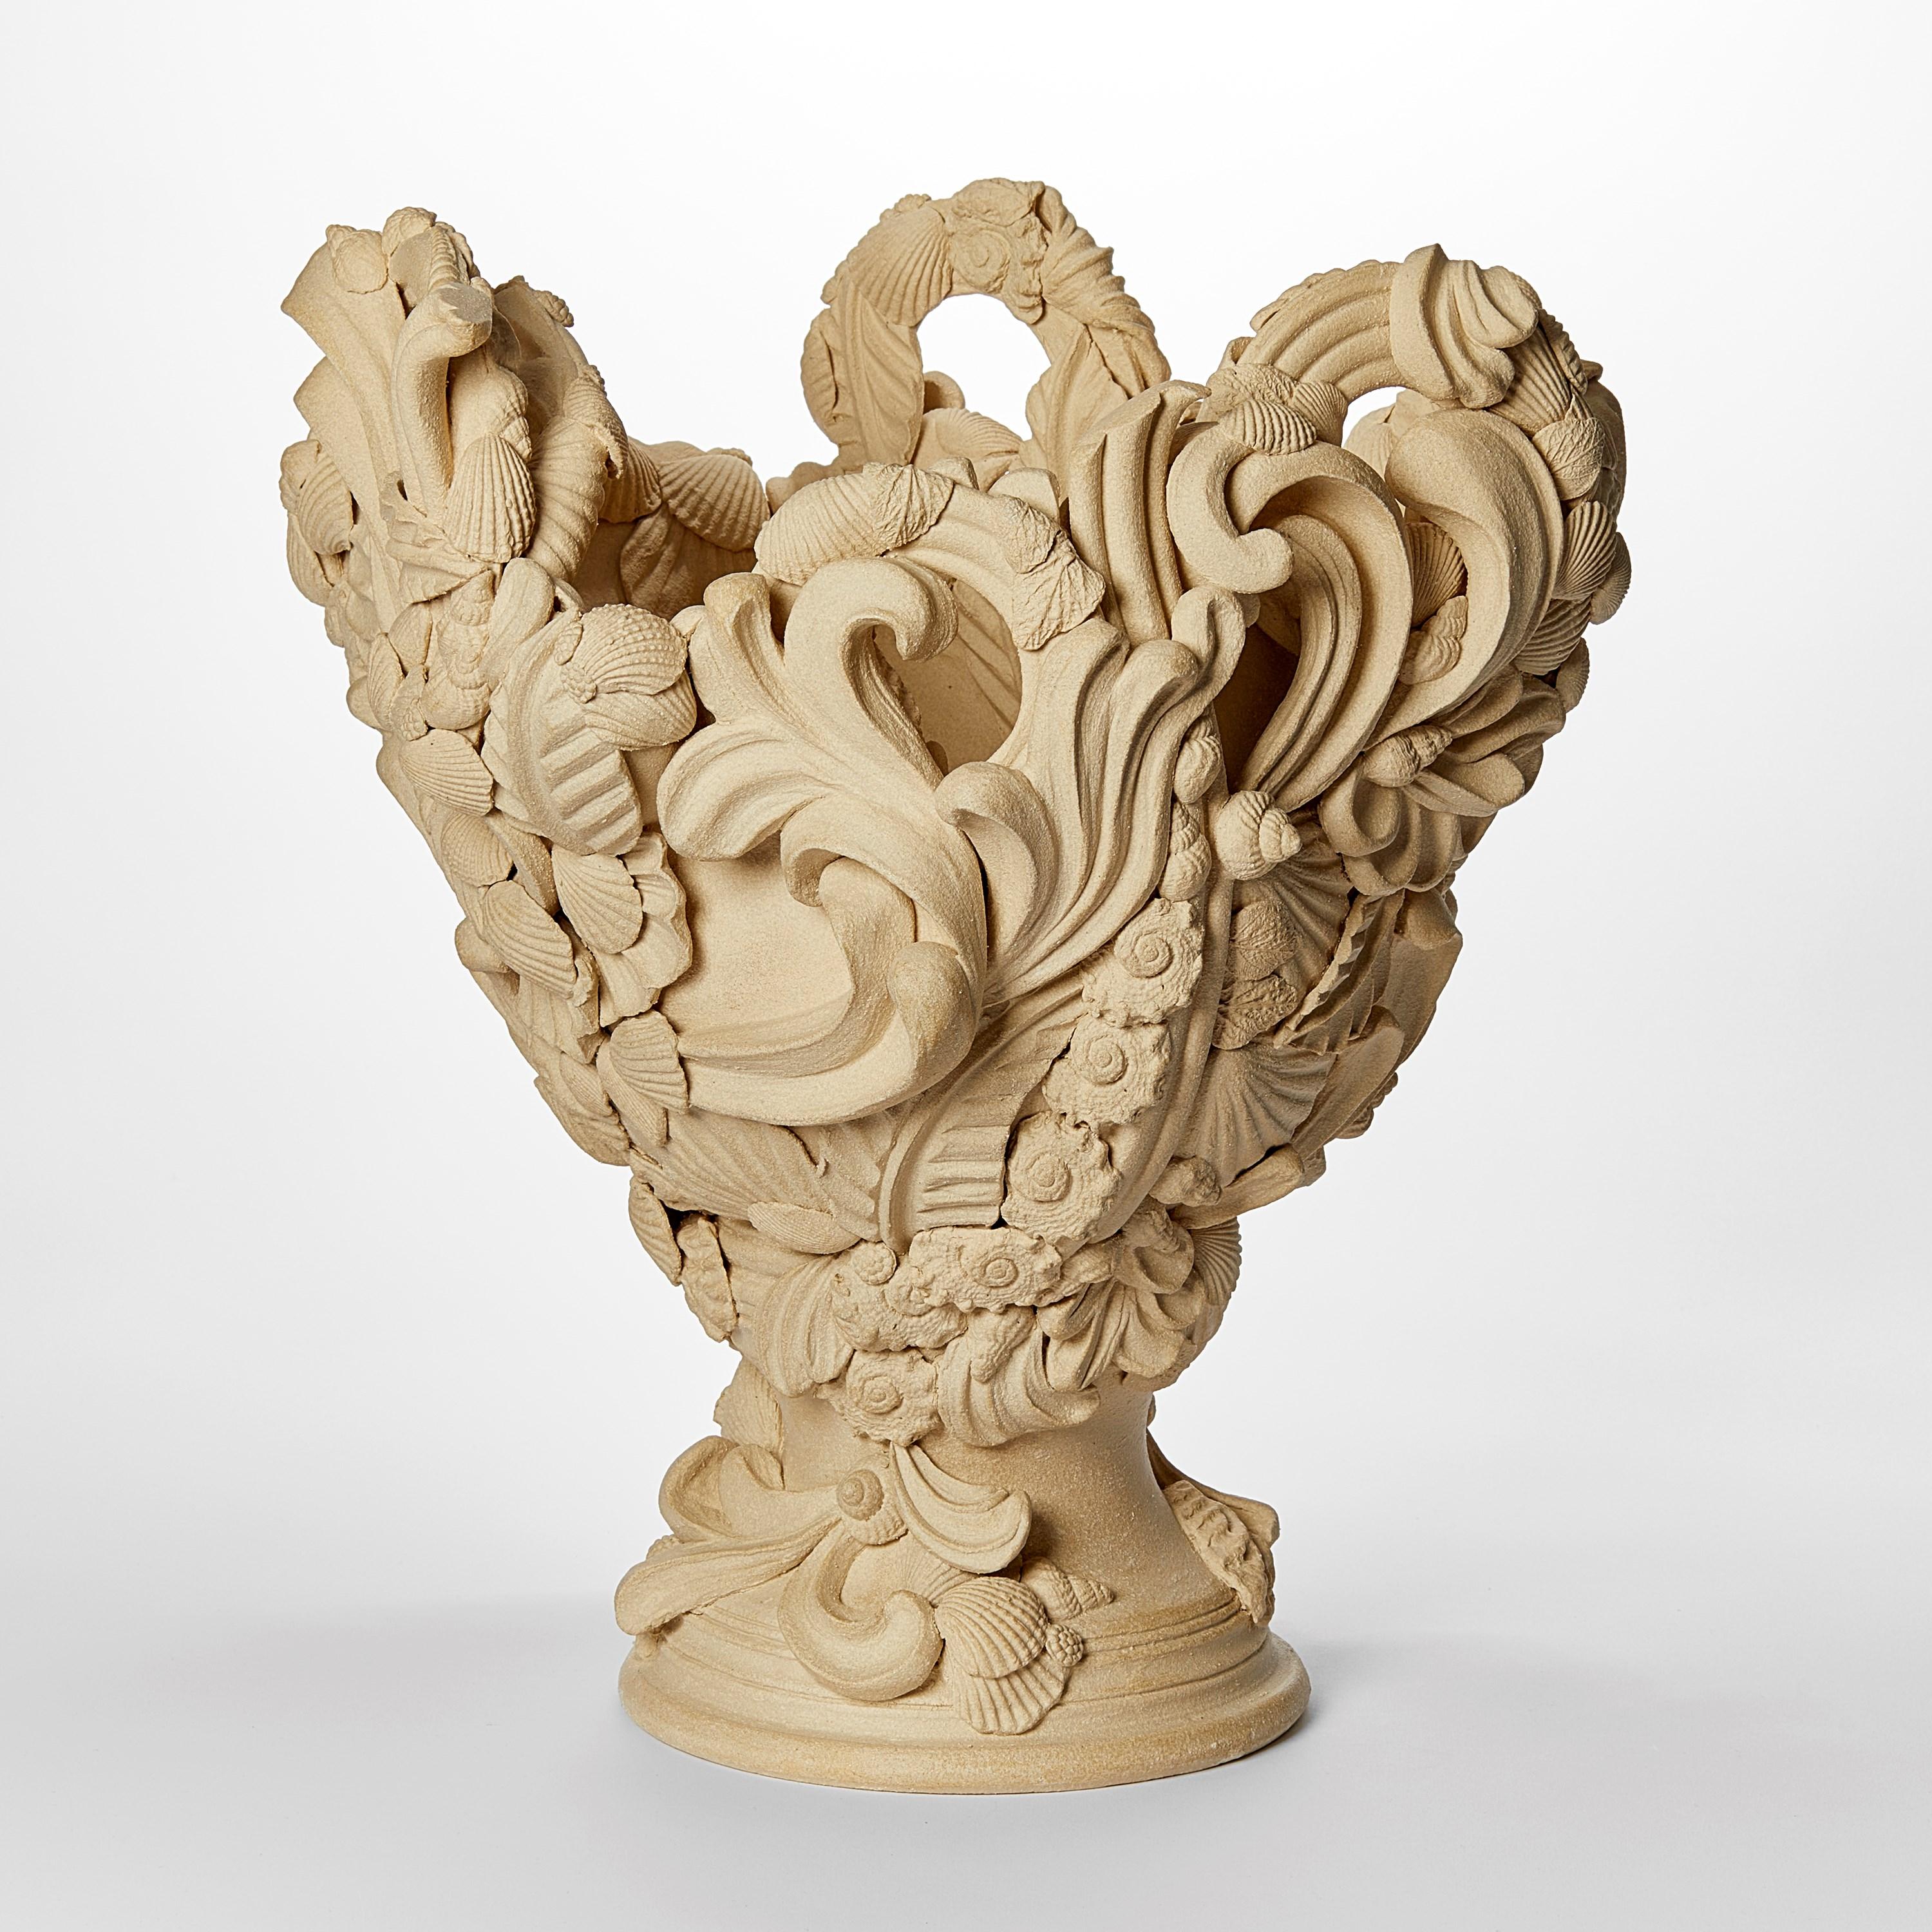 'Abundance I'  is a unique ceramic sculpture by the British artist, Jo Taylor.

Taylor’s inspiration comes from highly decorative architectural features such as ornate plaster ceilings, wrought iron and carved stone. Living near the Georgian city of